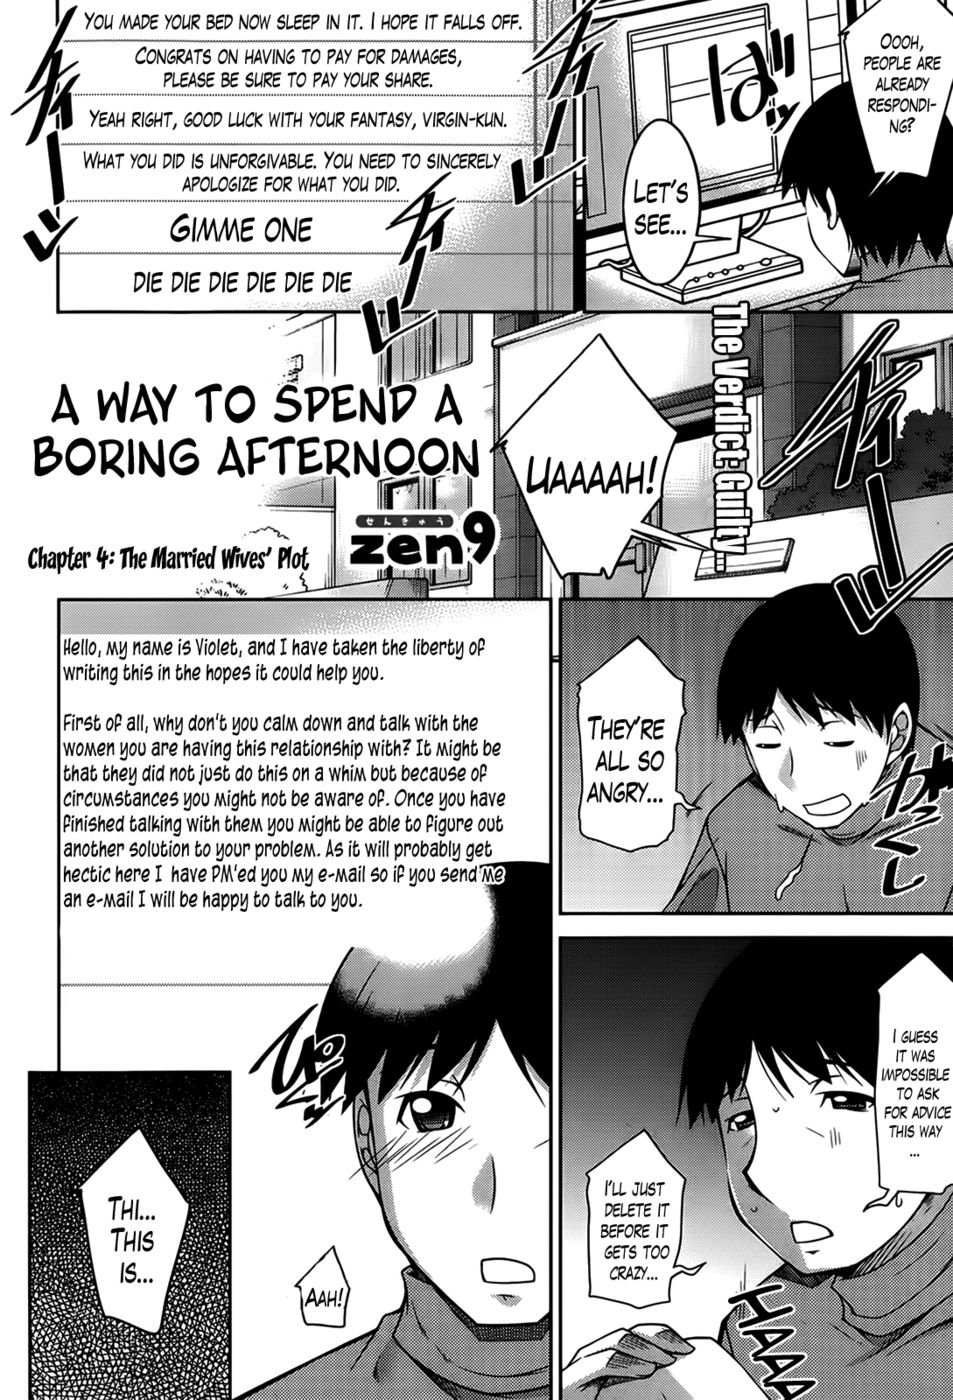 Hentai Manga Comic-A Way to Spend a Boring Afternoon-Chapter 4-2